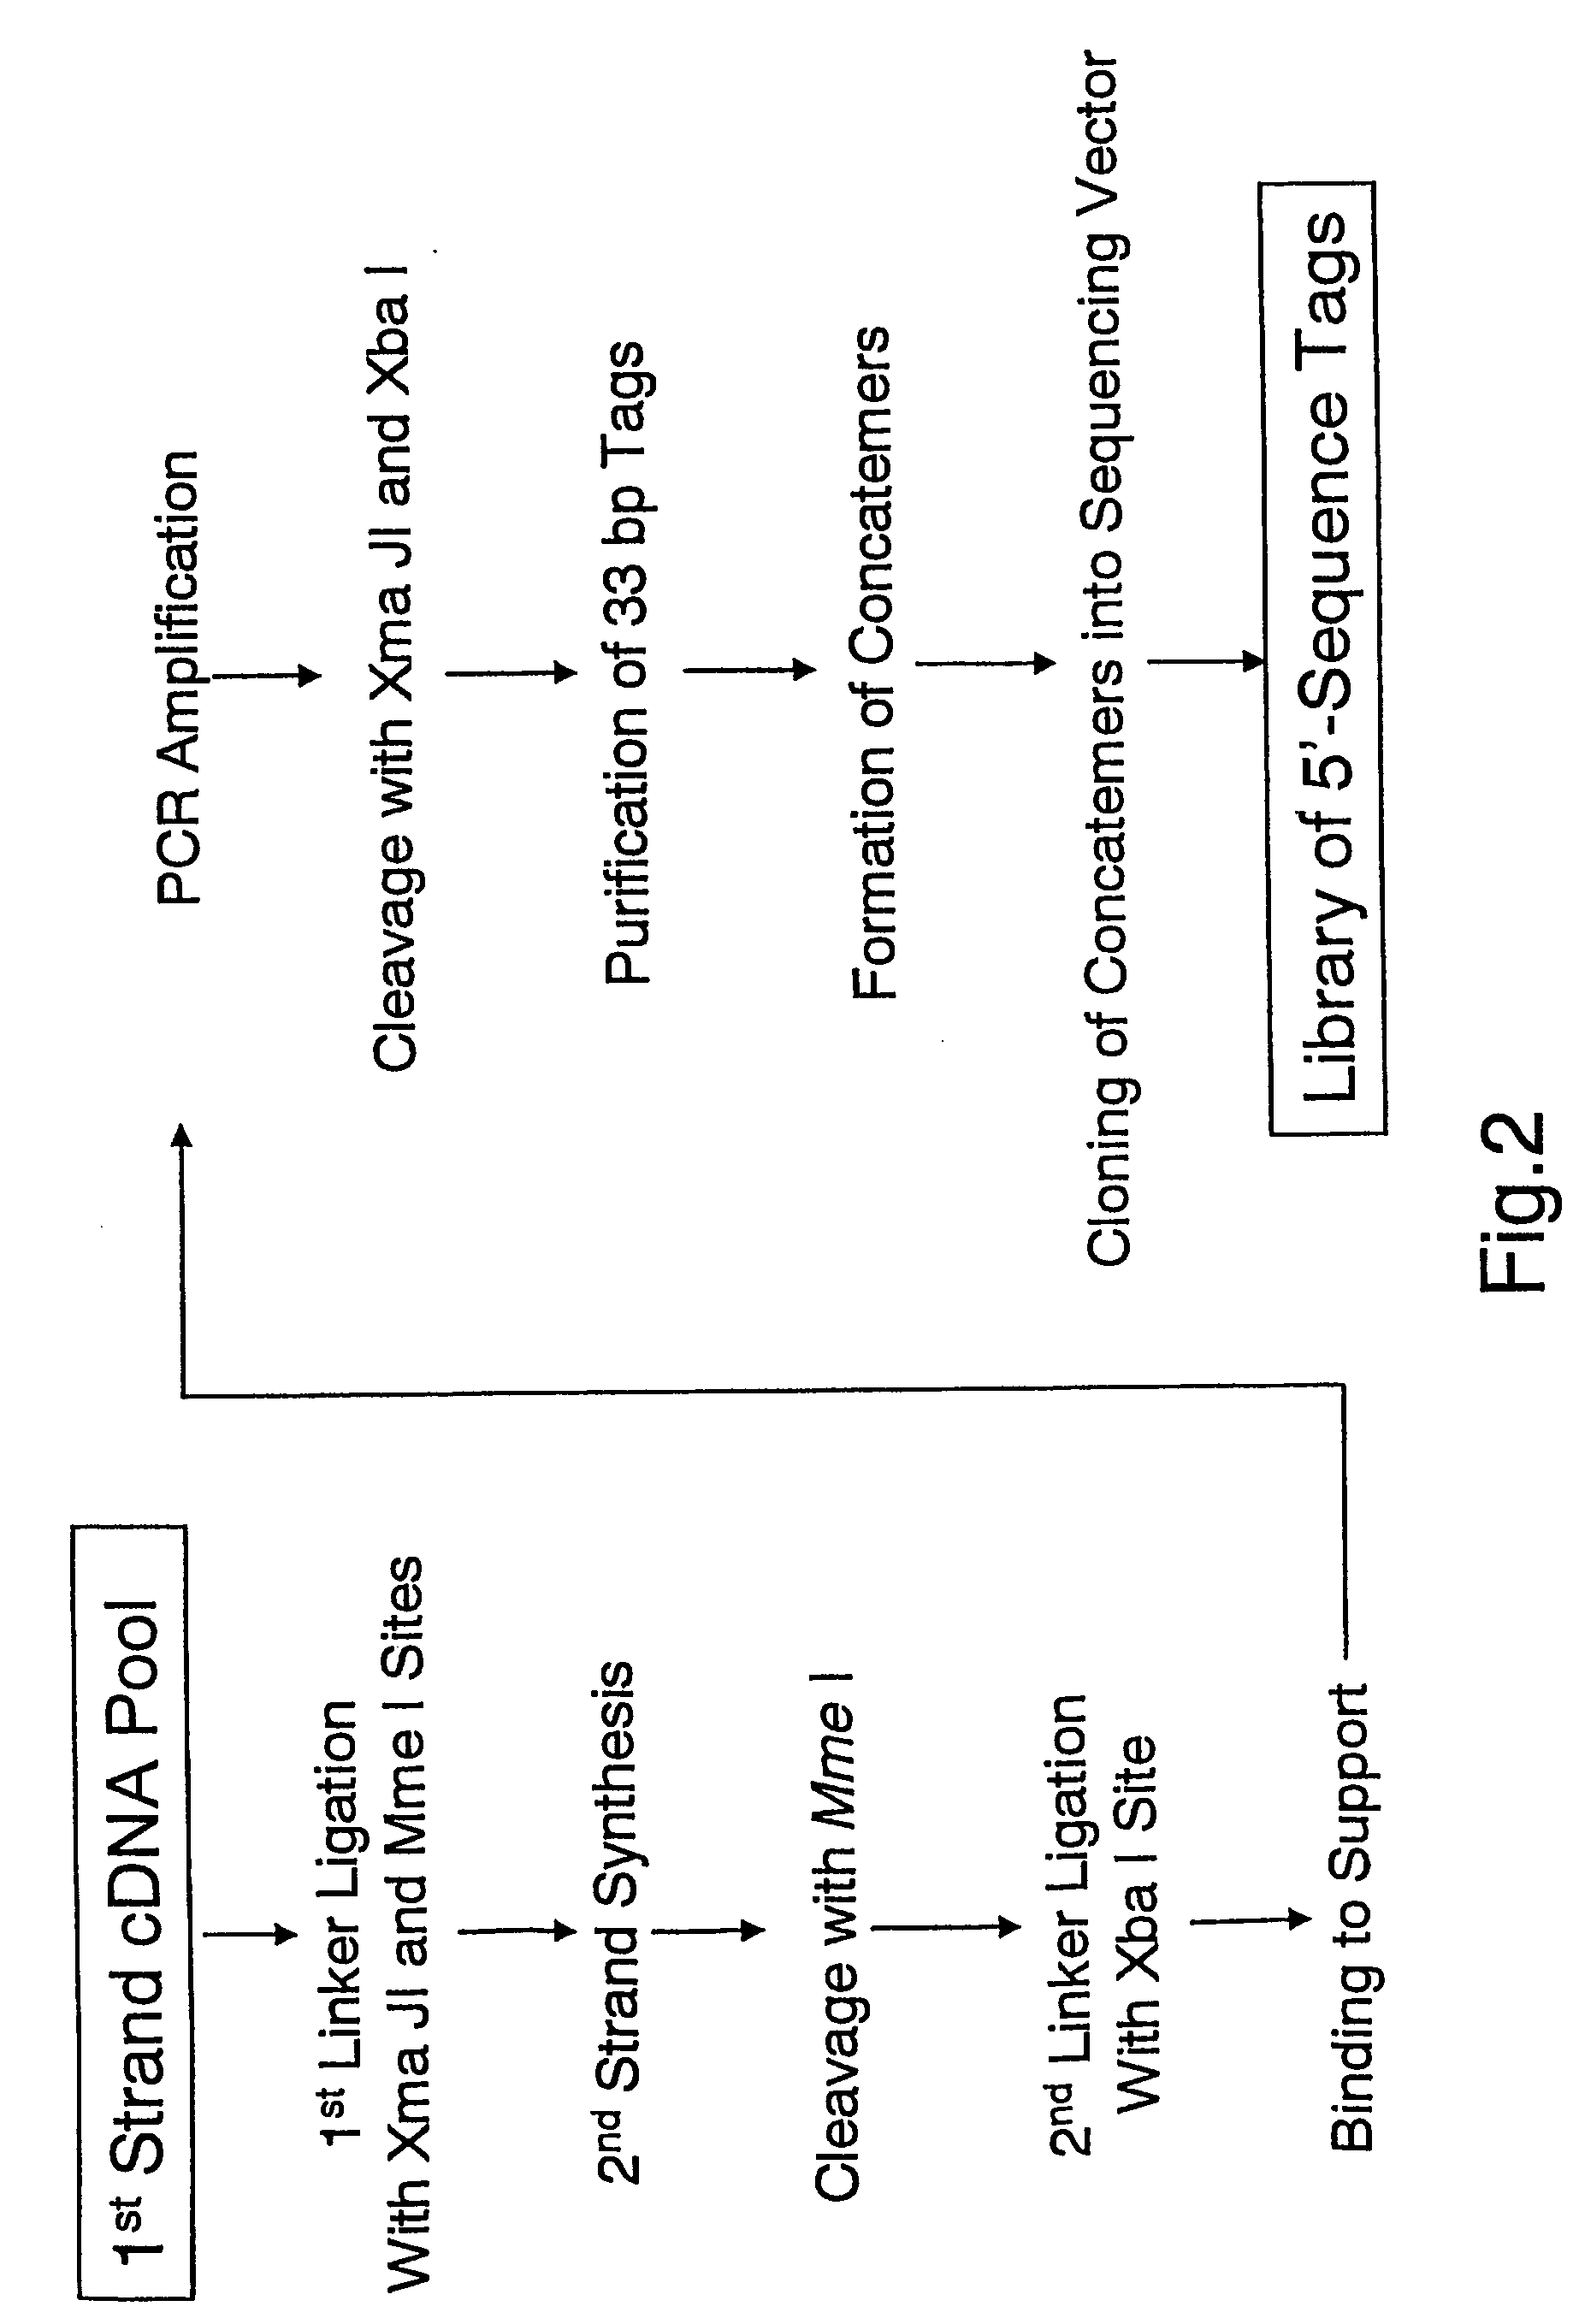 Method of utilizing the 5'end of transcribed nucleic acid regions for cloning and analysis